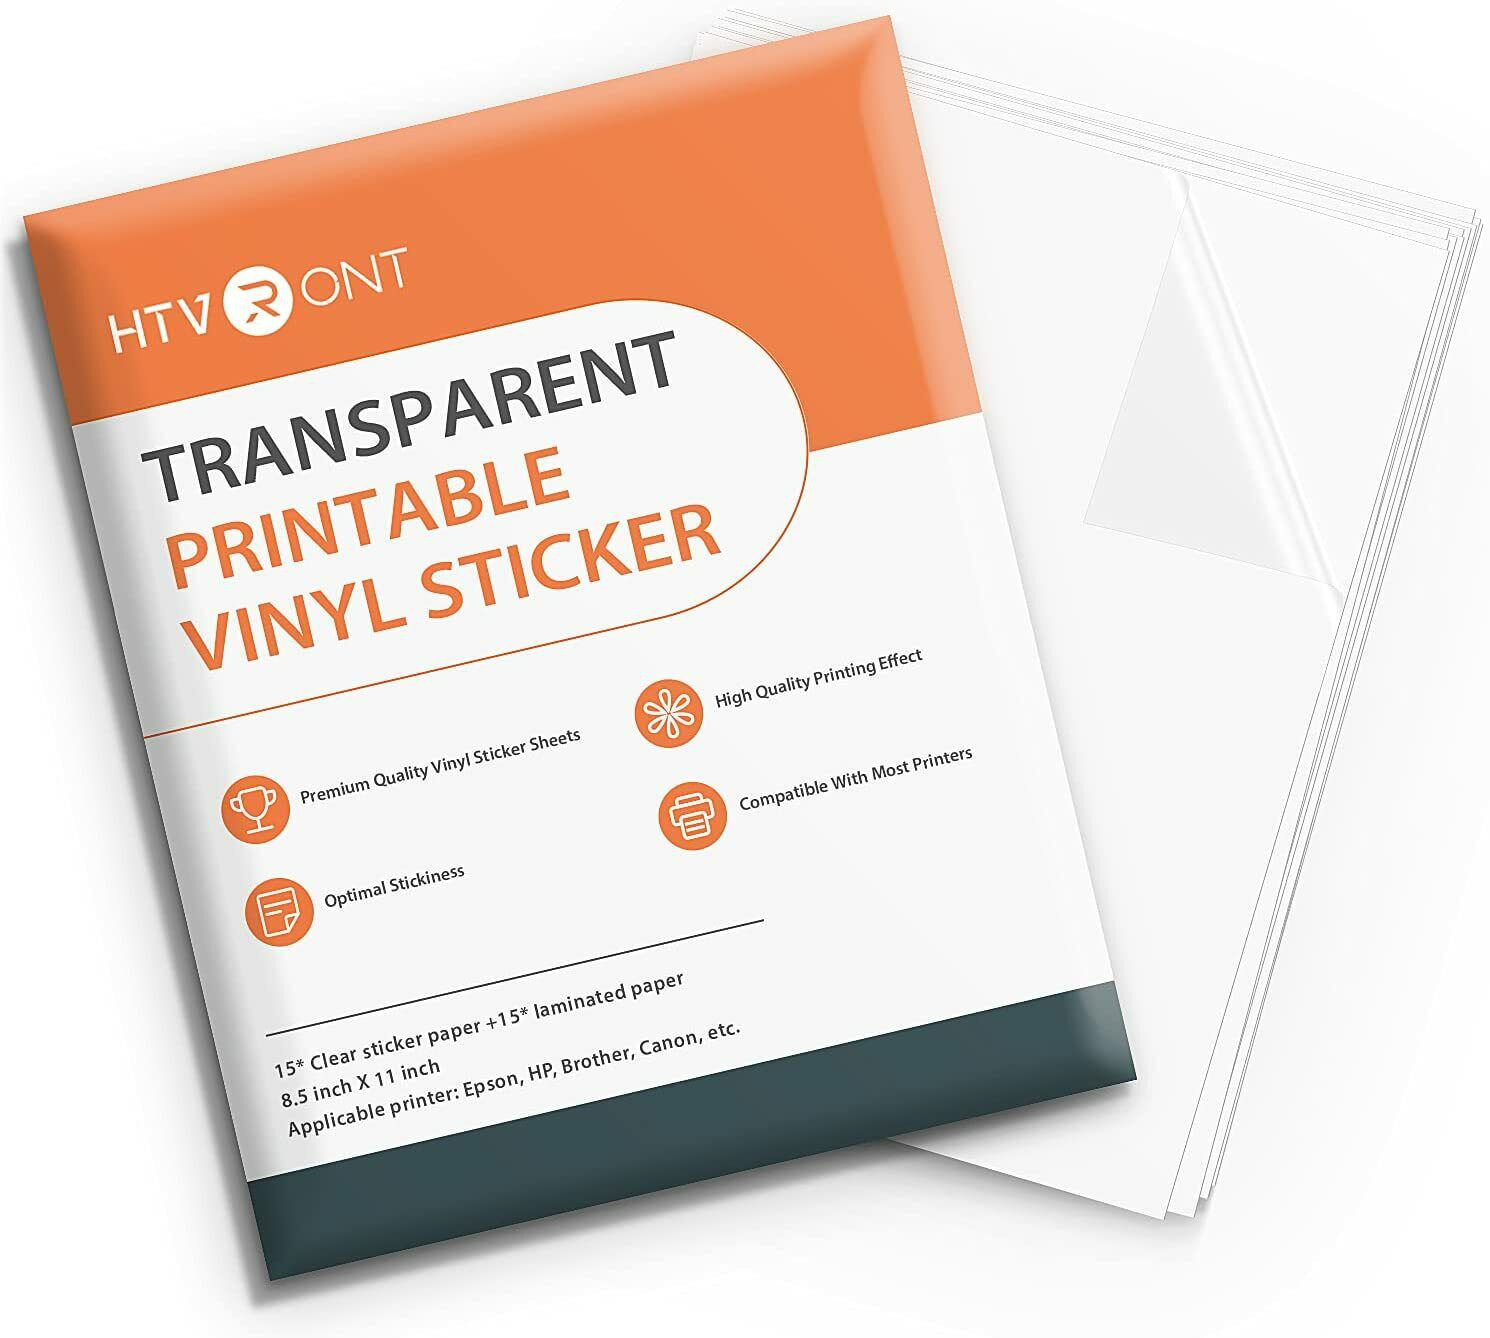 HTVRONT 20pcs 8.5 inch x 11 inch Translucent Printable Vinyl Sticker Paper for Inkjet Printer, Size: 11 in, Clear